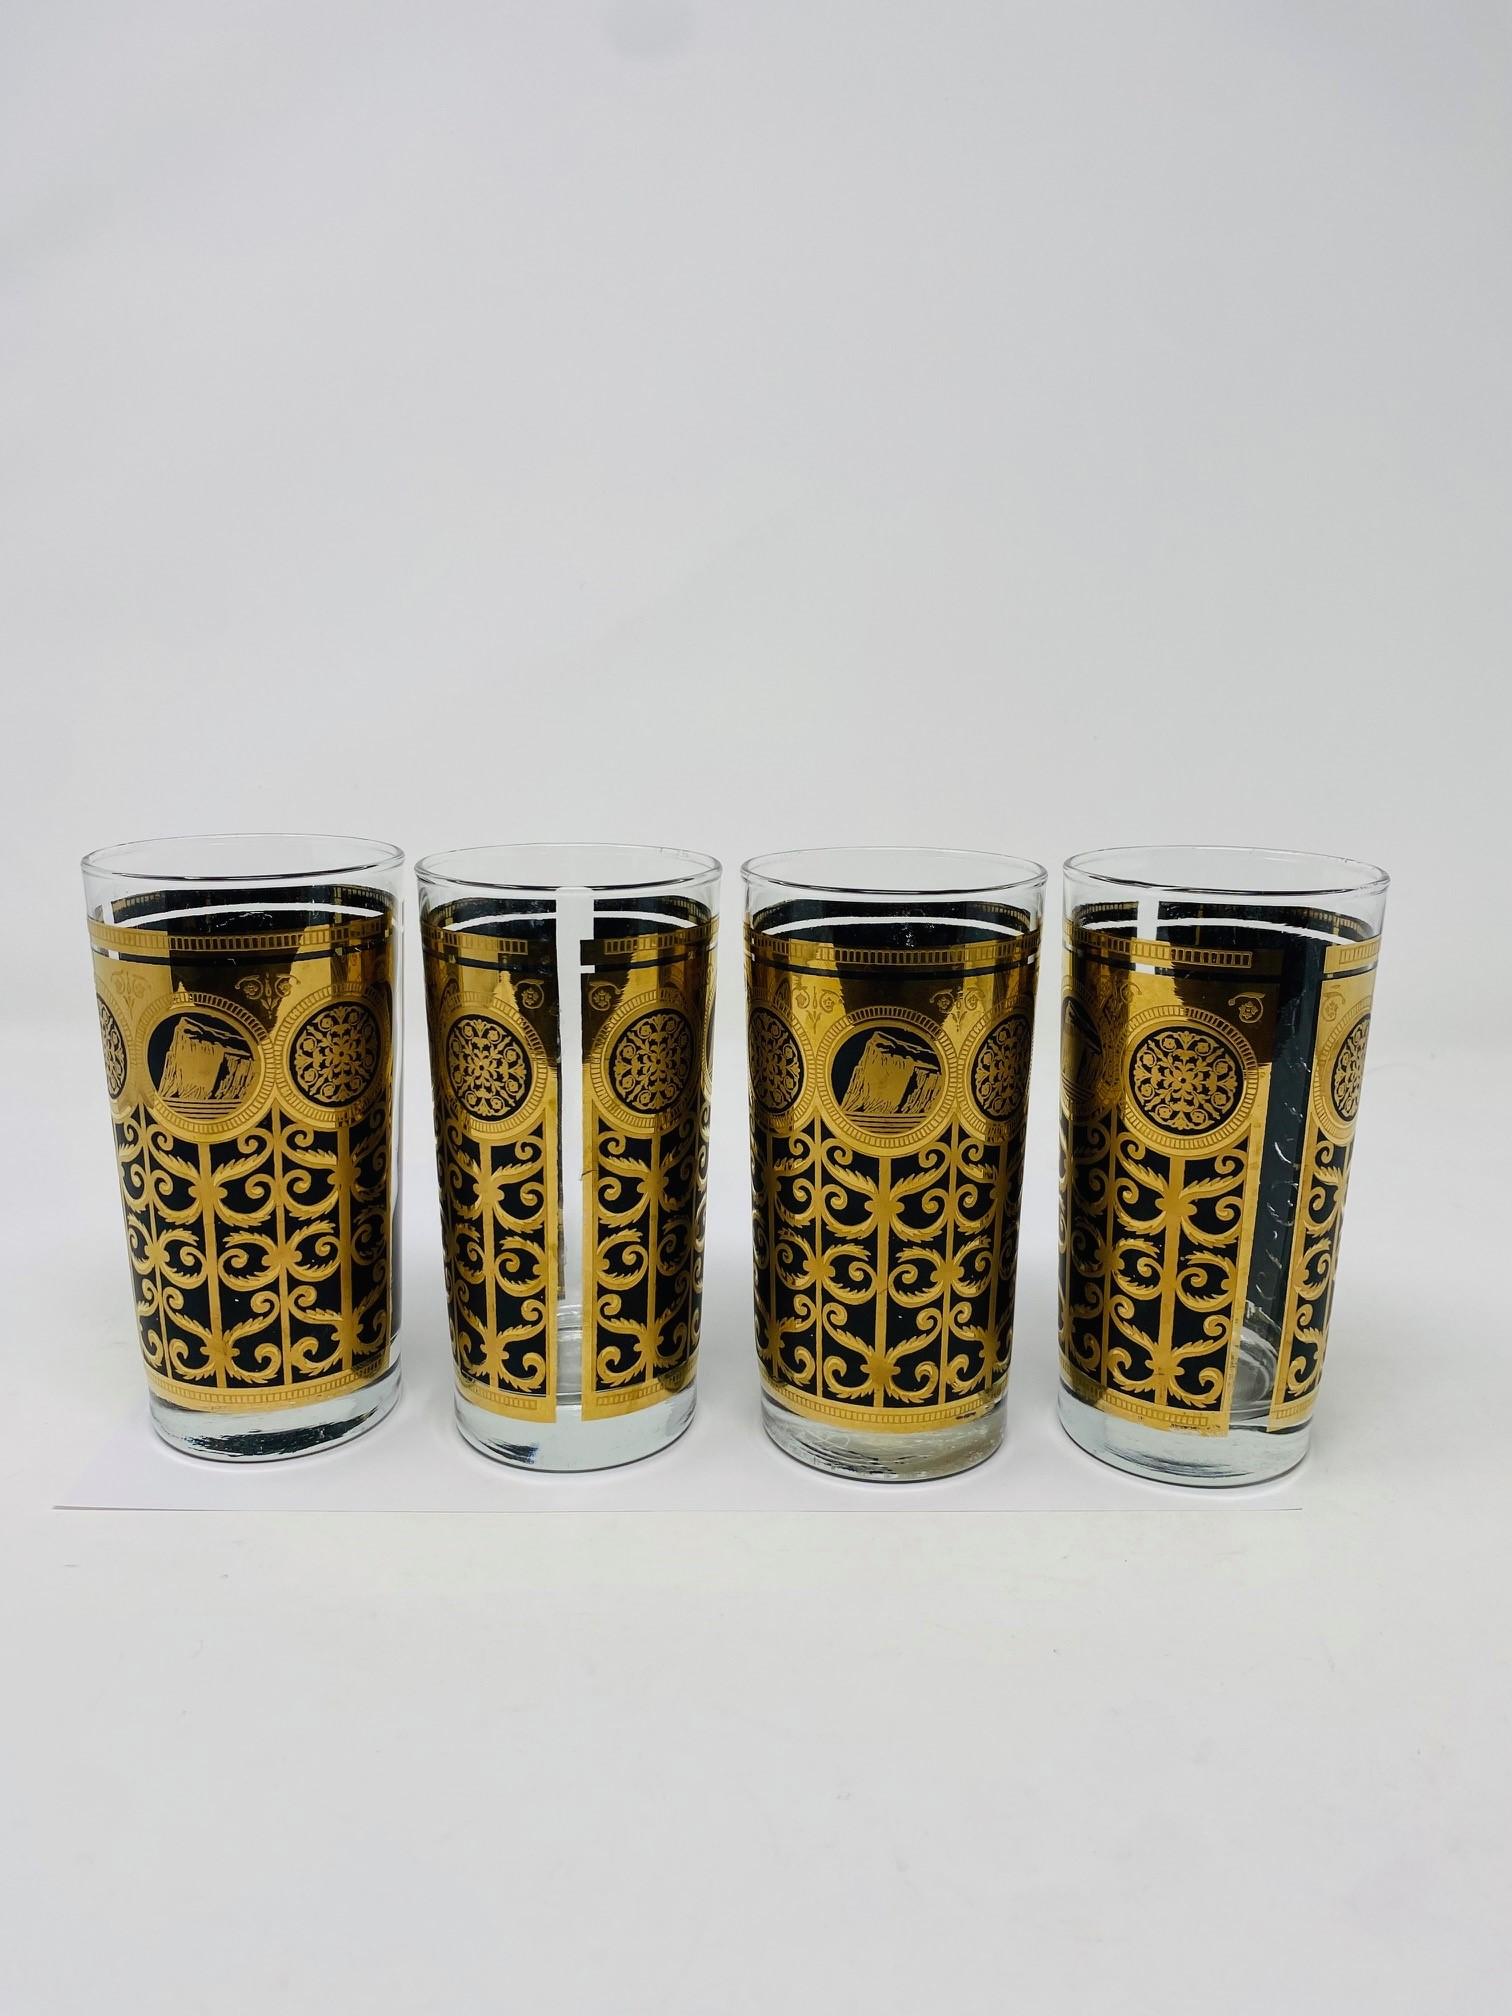 Beautiful set of 4 highball glasses by Fred Press.  This incredible design in a graphic gold and black scheme is glamourous and unique.  These pieces commemorated the Prudential Insurance Company, featuring the Rock of Gibraltar, their symbol.  This